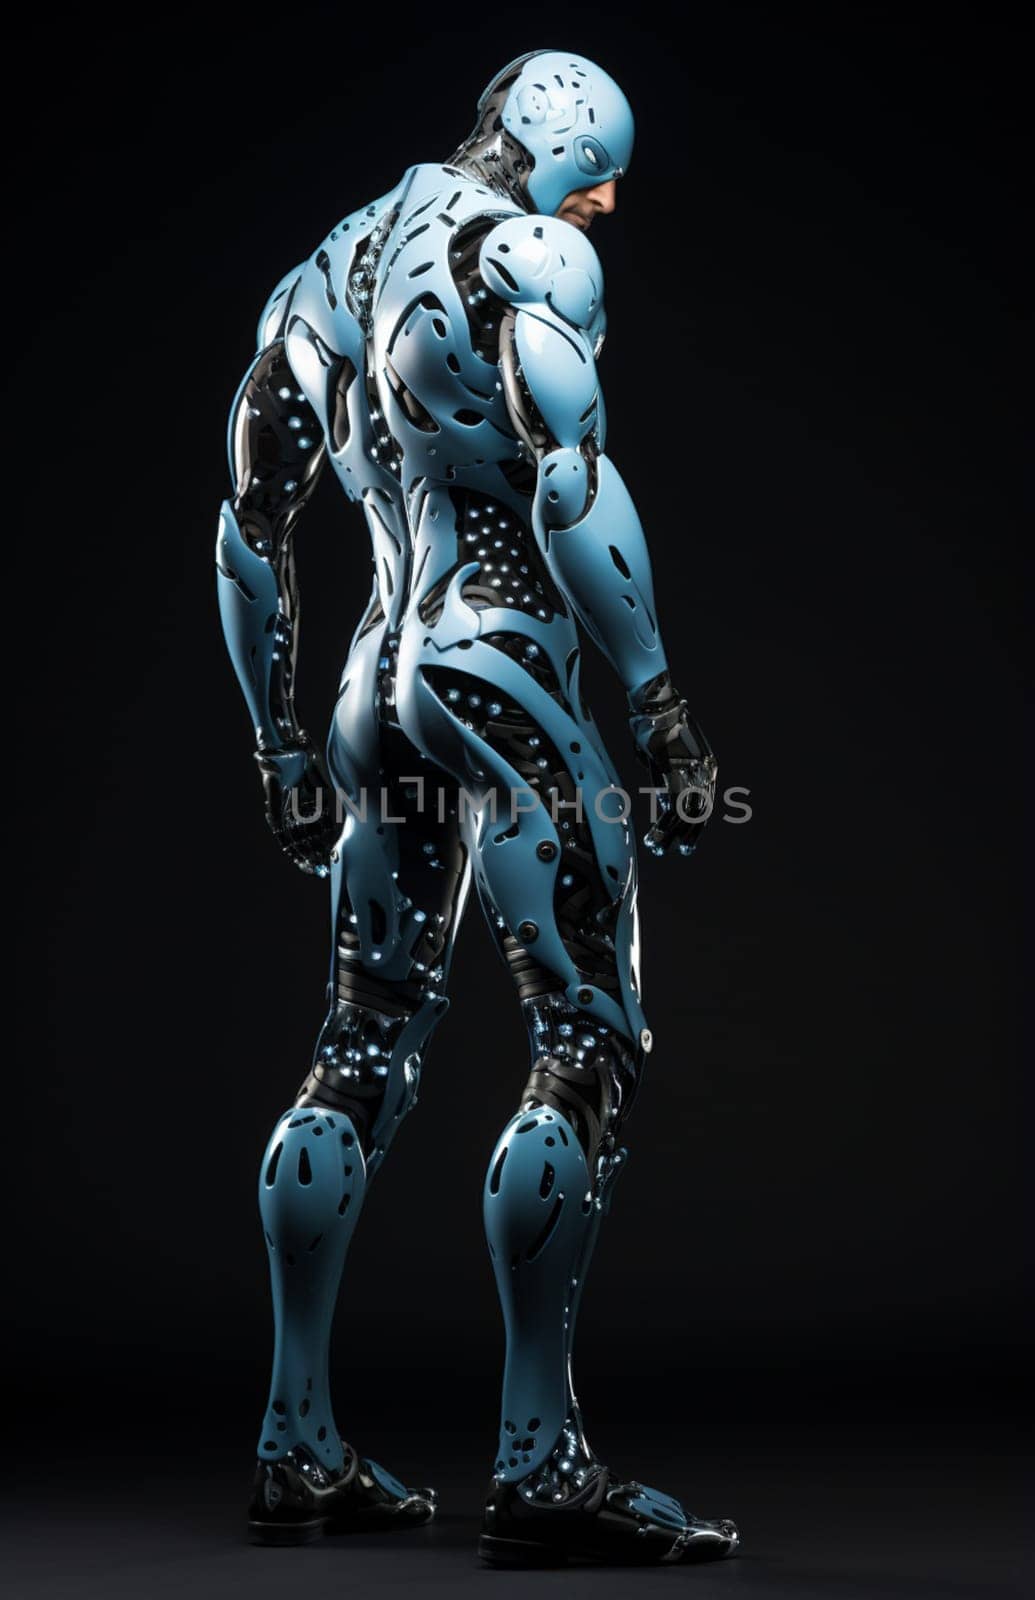 steel man, the muscle man in a white background, will put some creative sensor at yours creations, 3d illustration